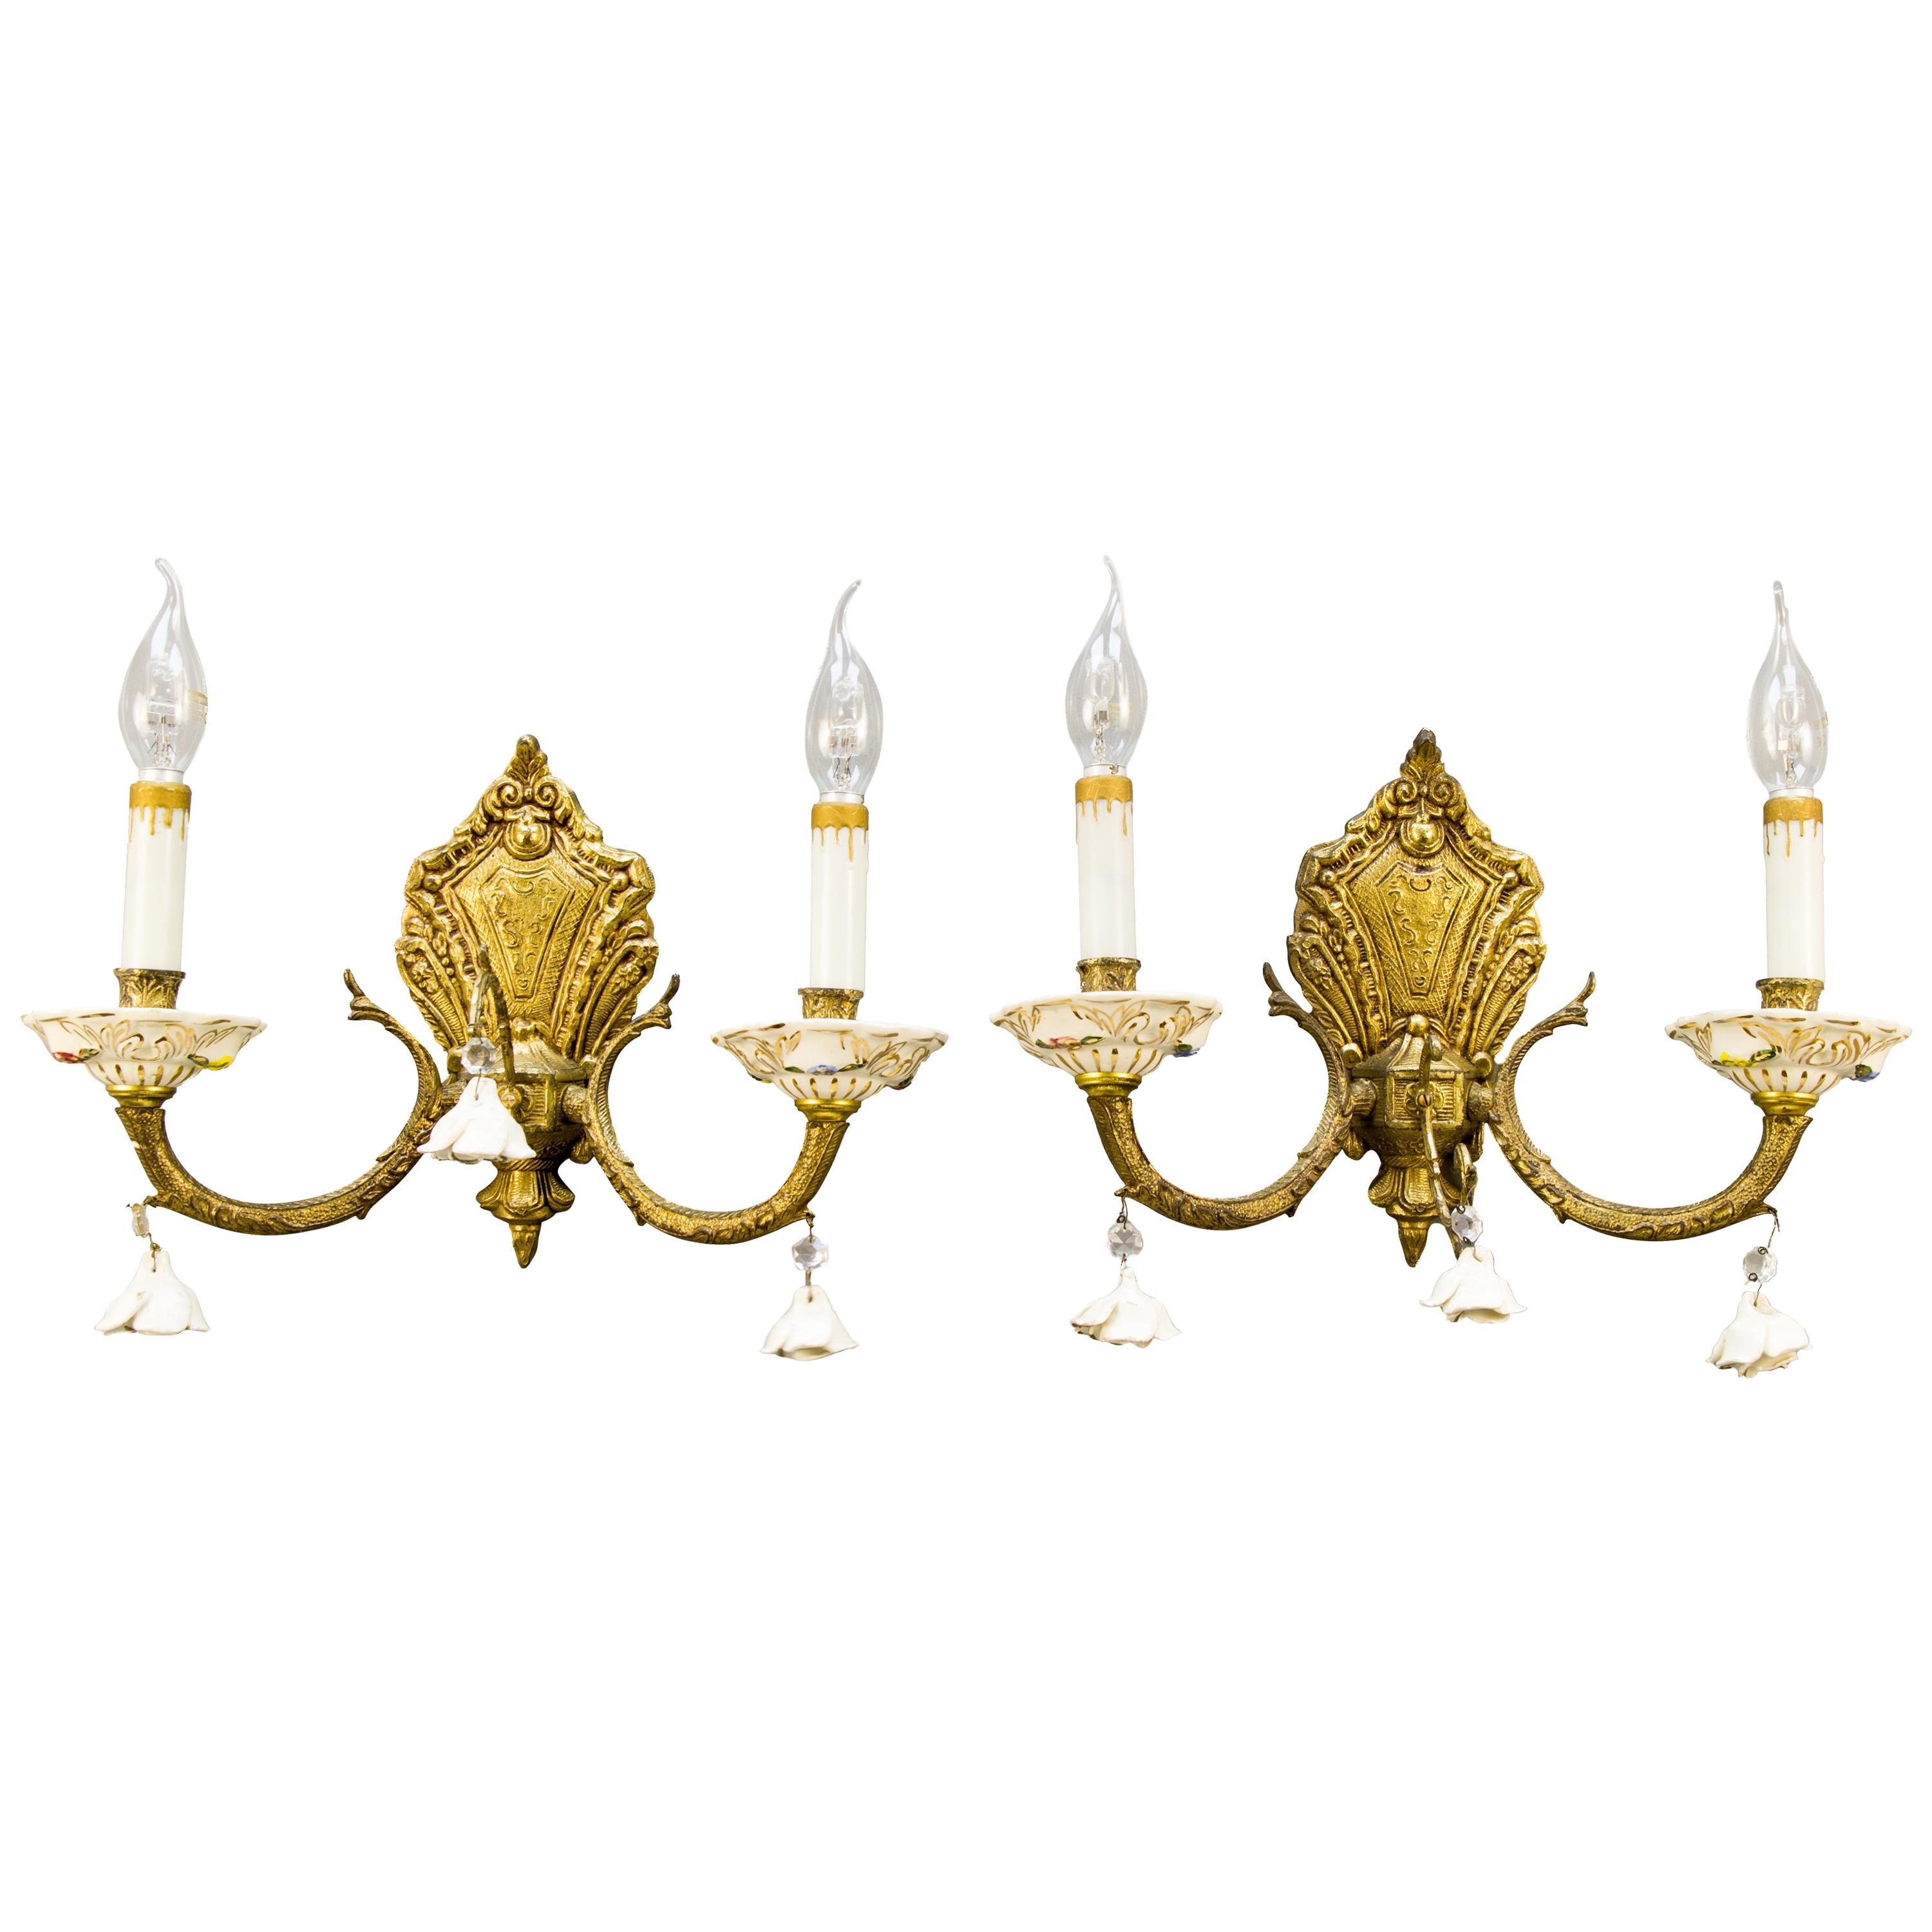 Pair of Italian Two-Light Bronze and Porcelain Floral Sconces